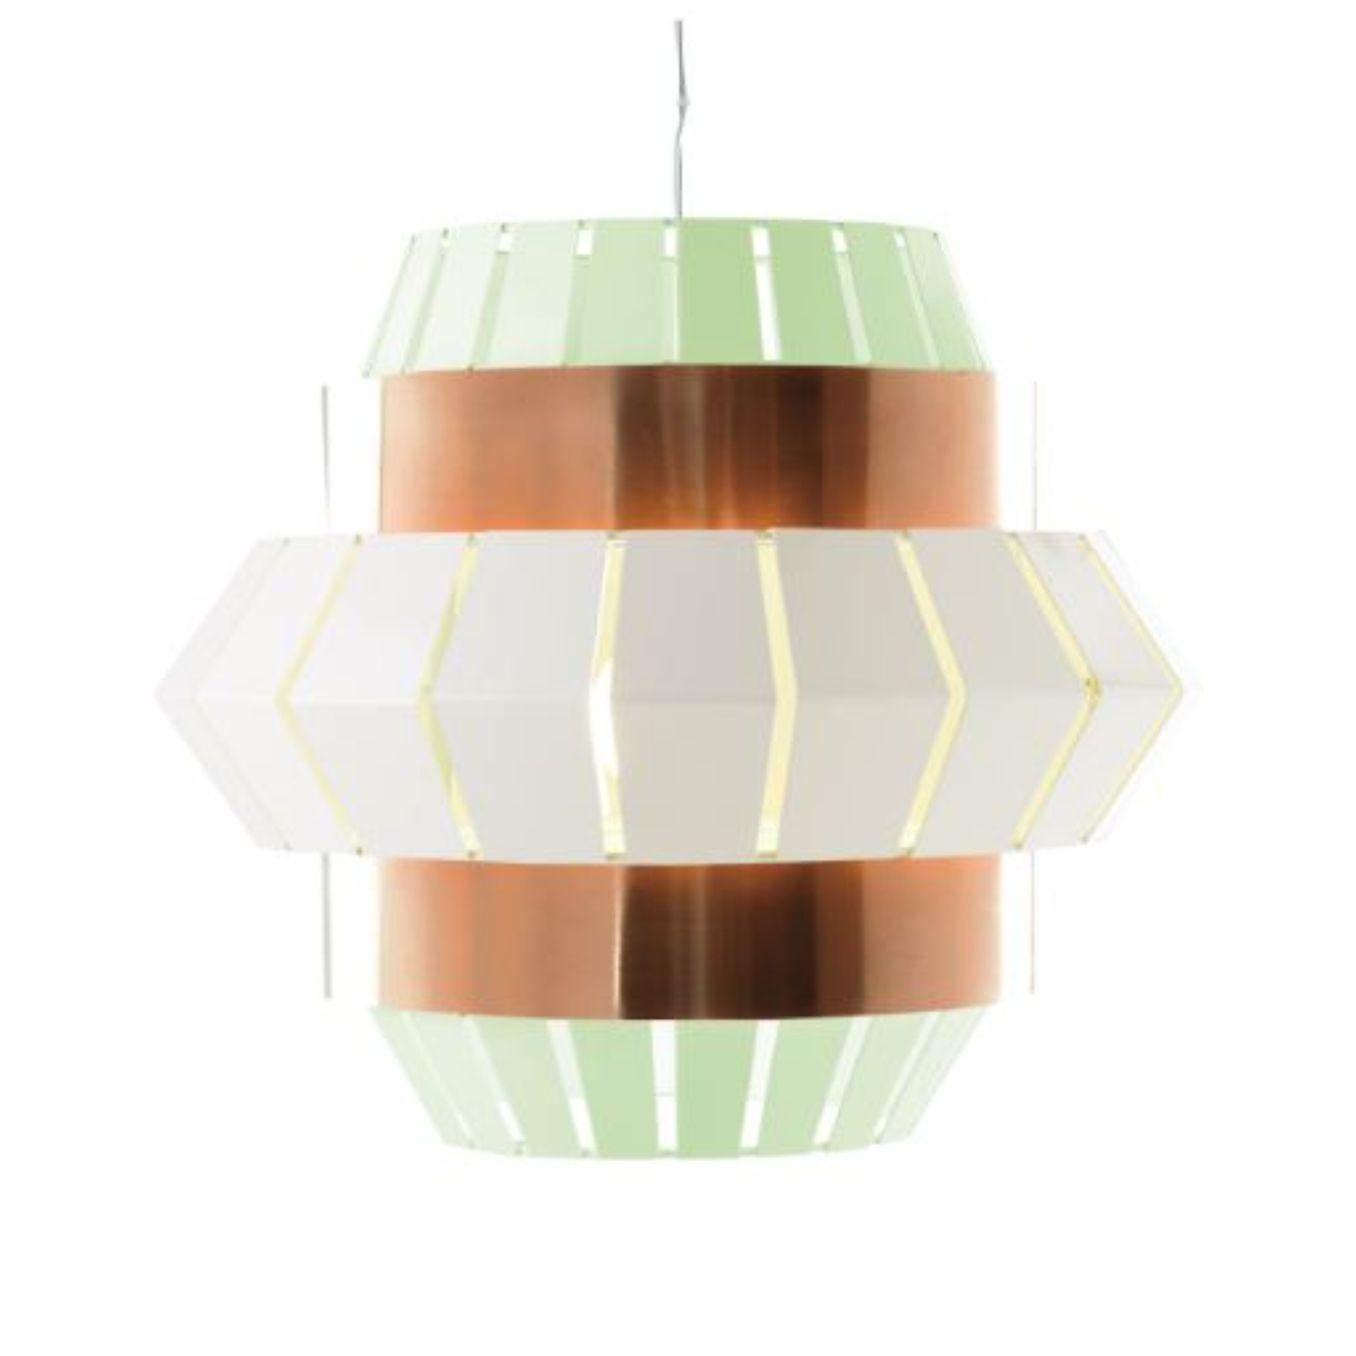 Dream and ivory comb suspension lamp with copper Ring by Dooq
Dimensions: W 74 x D 74 x H 60 cm
Materials: lacquered metal, polished copper.
Also available in different colors and materials.

Information:
230V/50Hz
E27/1x20W